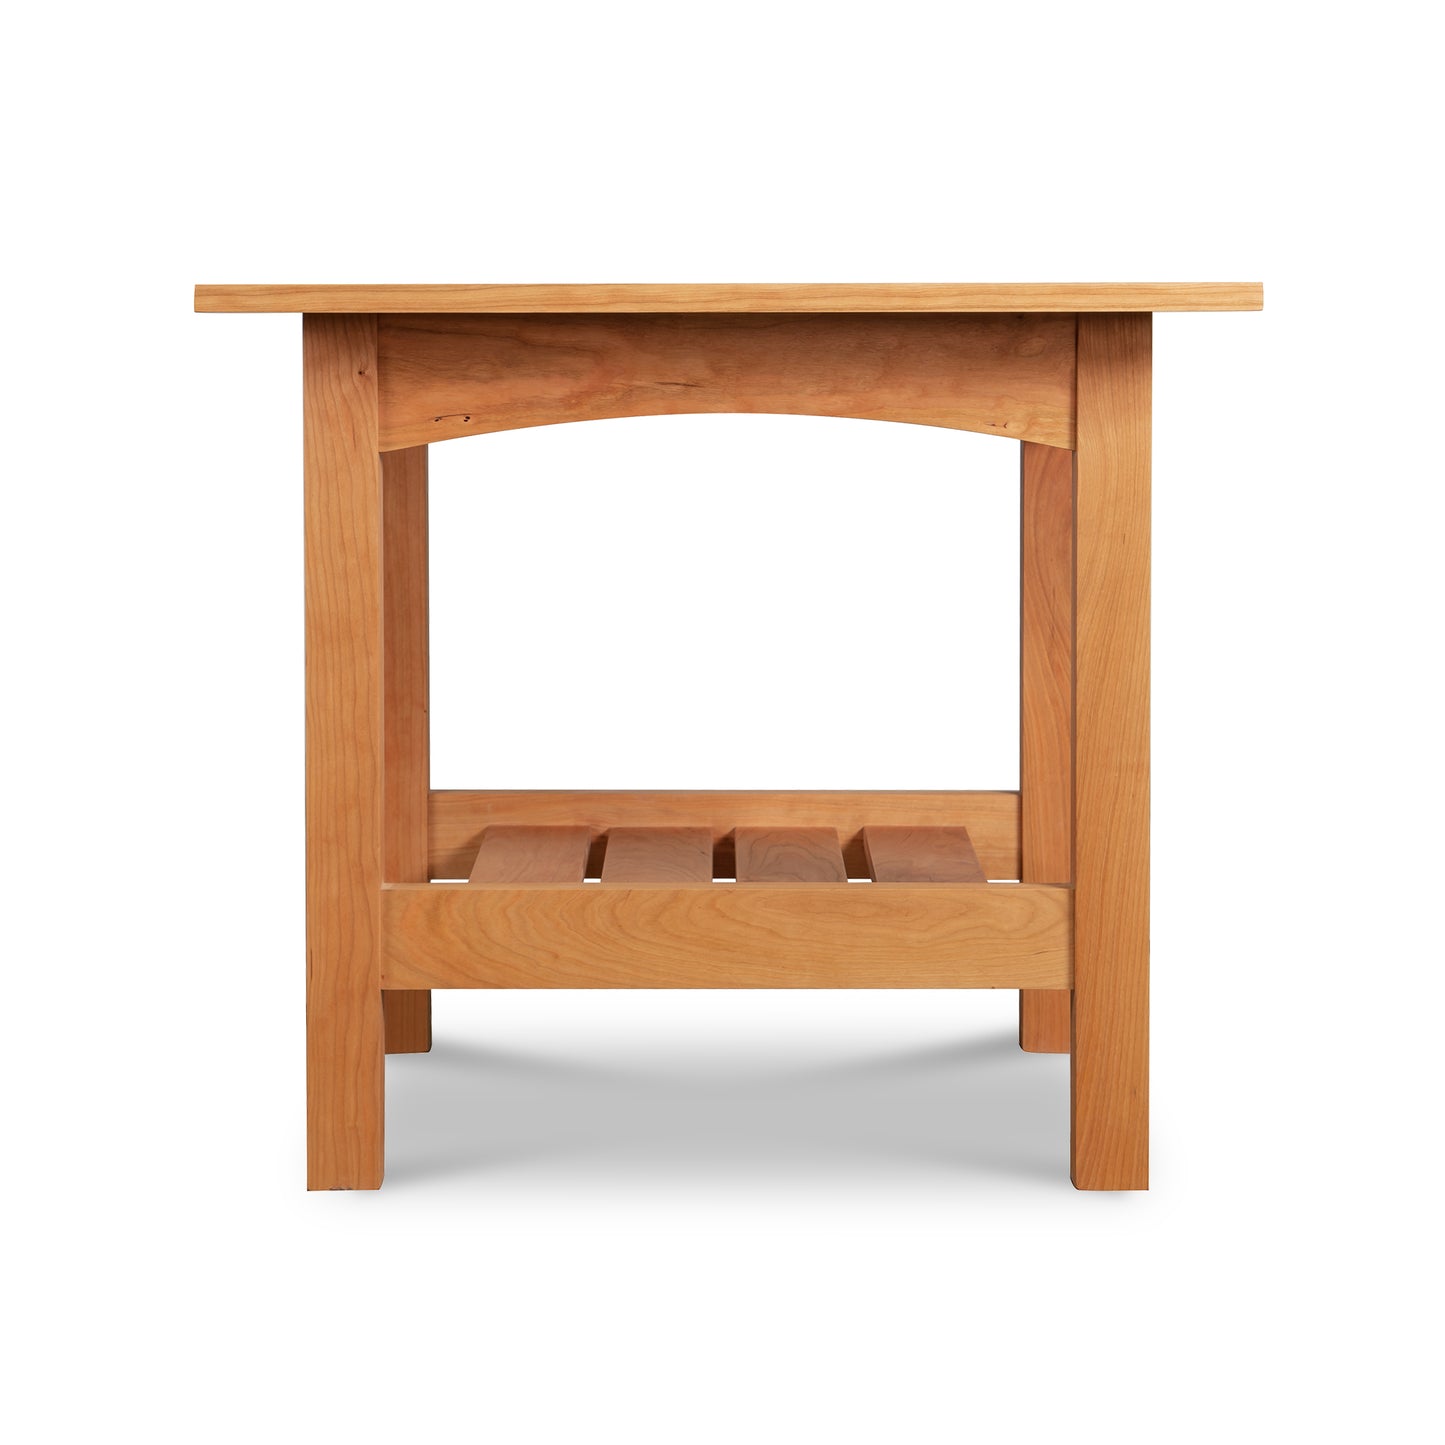 A Burlington Shaker Lamp Table by Vermont Furniture Designs, featuring a solid wood end table with a simplistic design and an open lower shelf, shown against a white background.